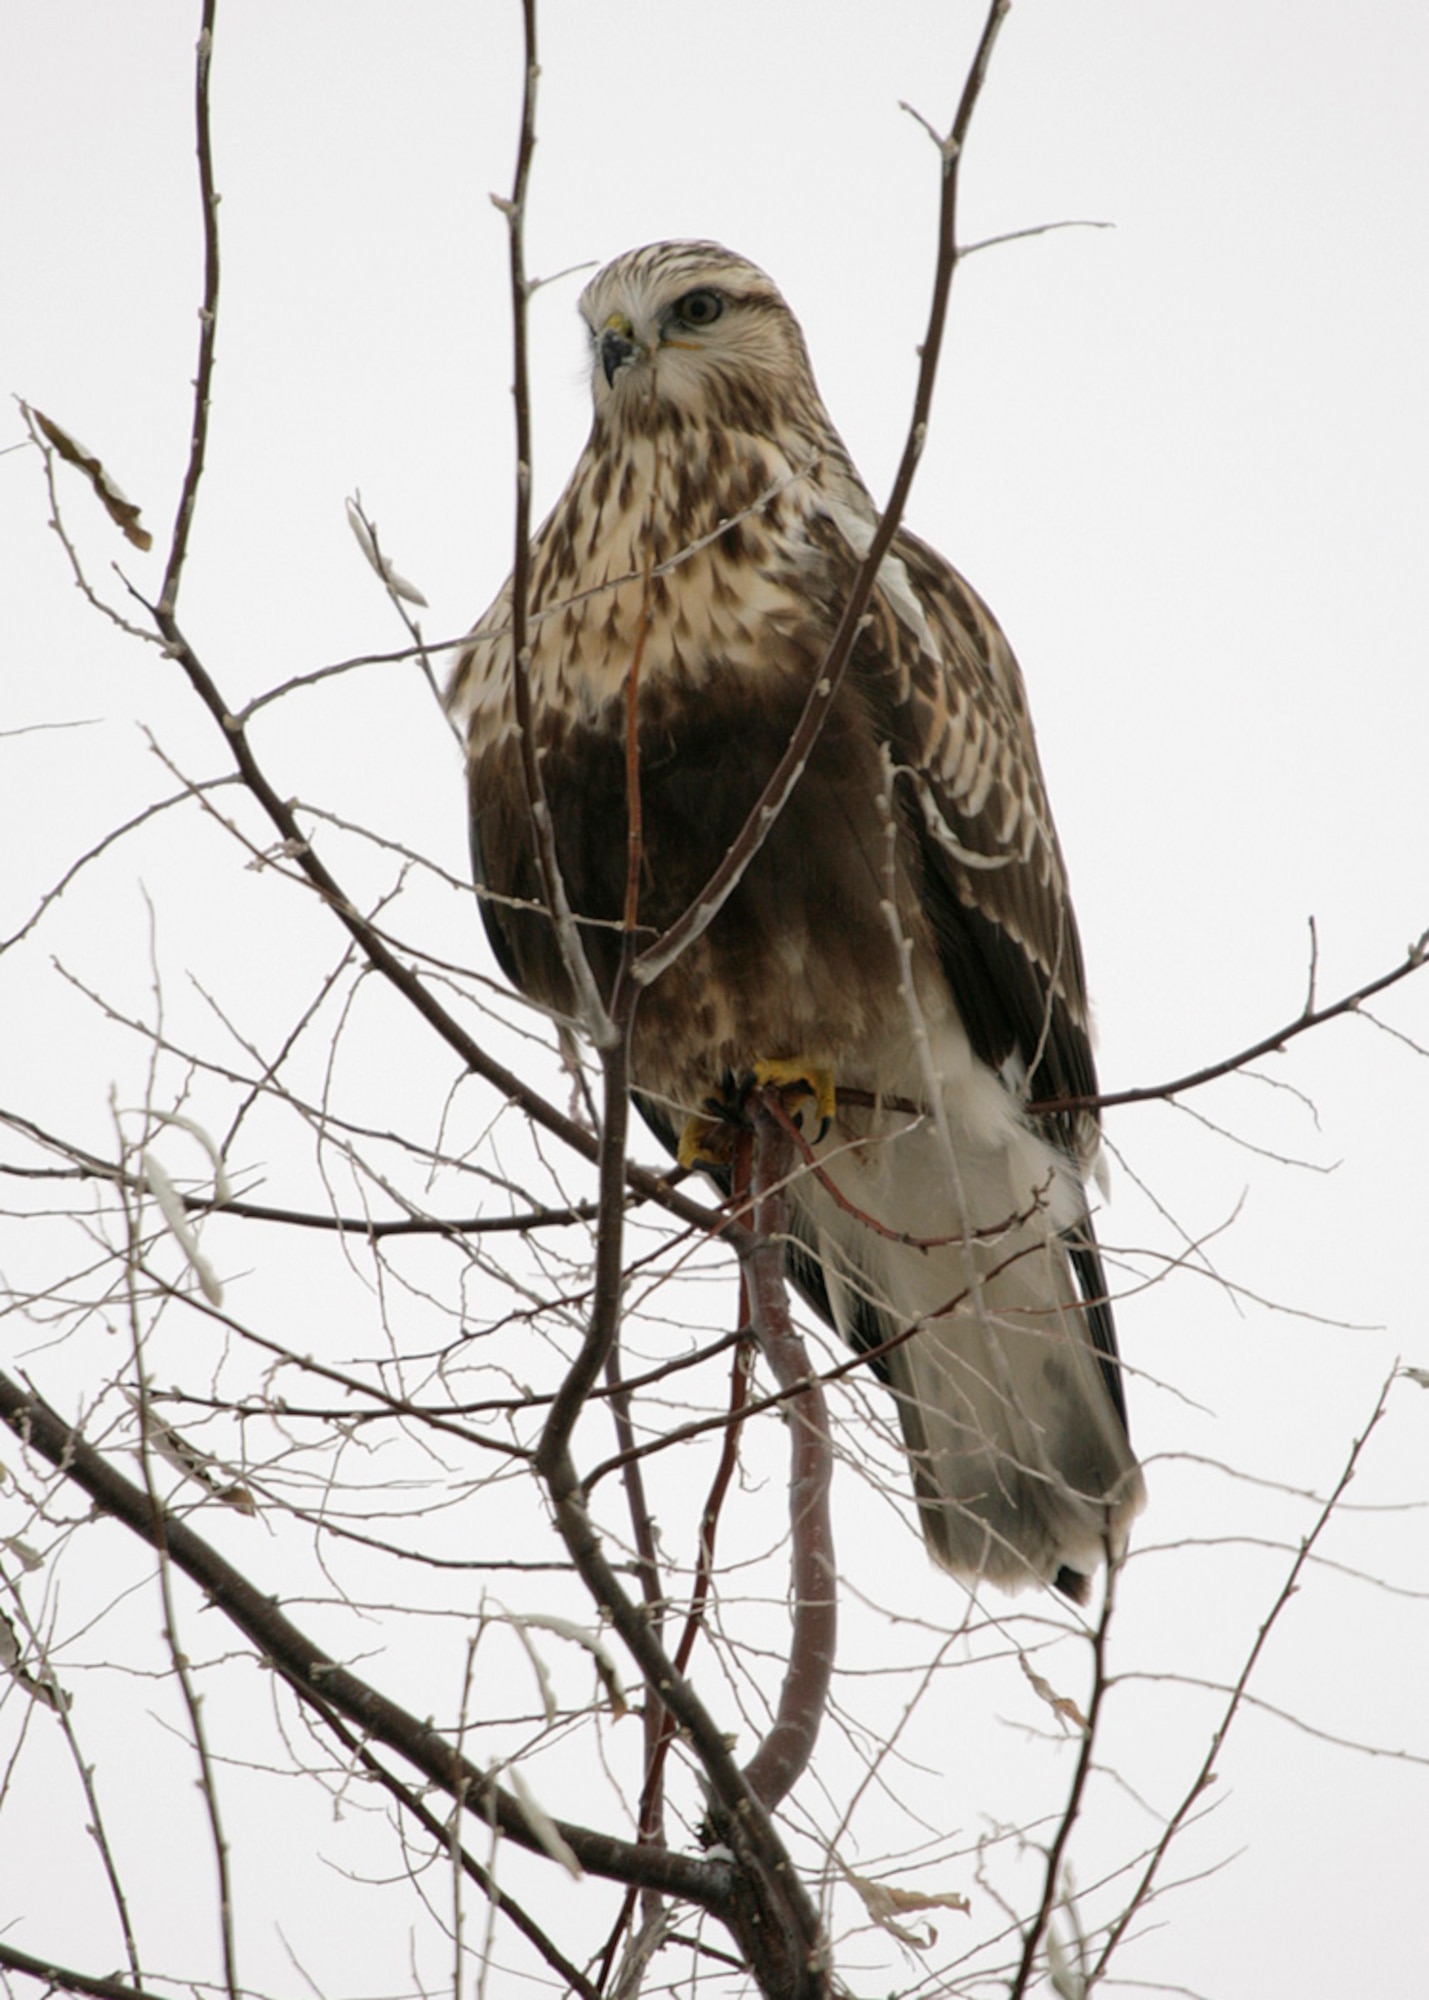 FAIRCHILD AIR FORCE BASE, Wash. – A rough-legged hawk was spotted resting in a Russian olive in Fairchild’s wildlife area in November, 2006. Many birds, mammals and other animals can be spotted now in the area. (U.S. Air Force photo/Paul Re-Rocker)
